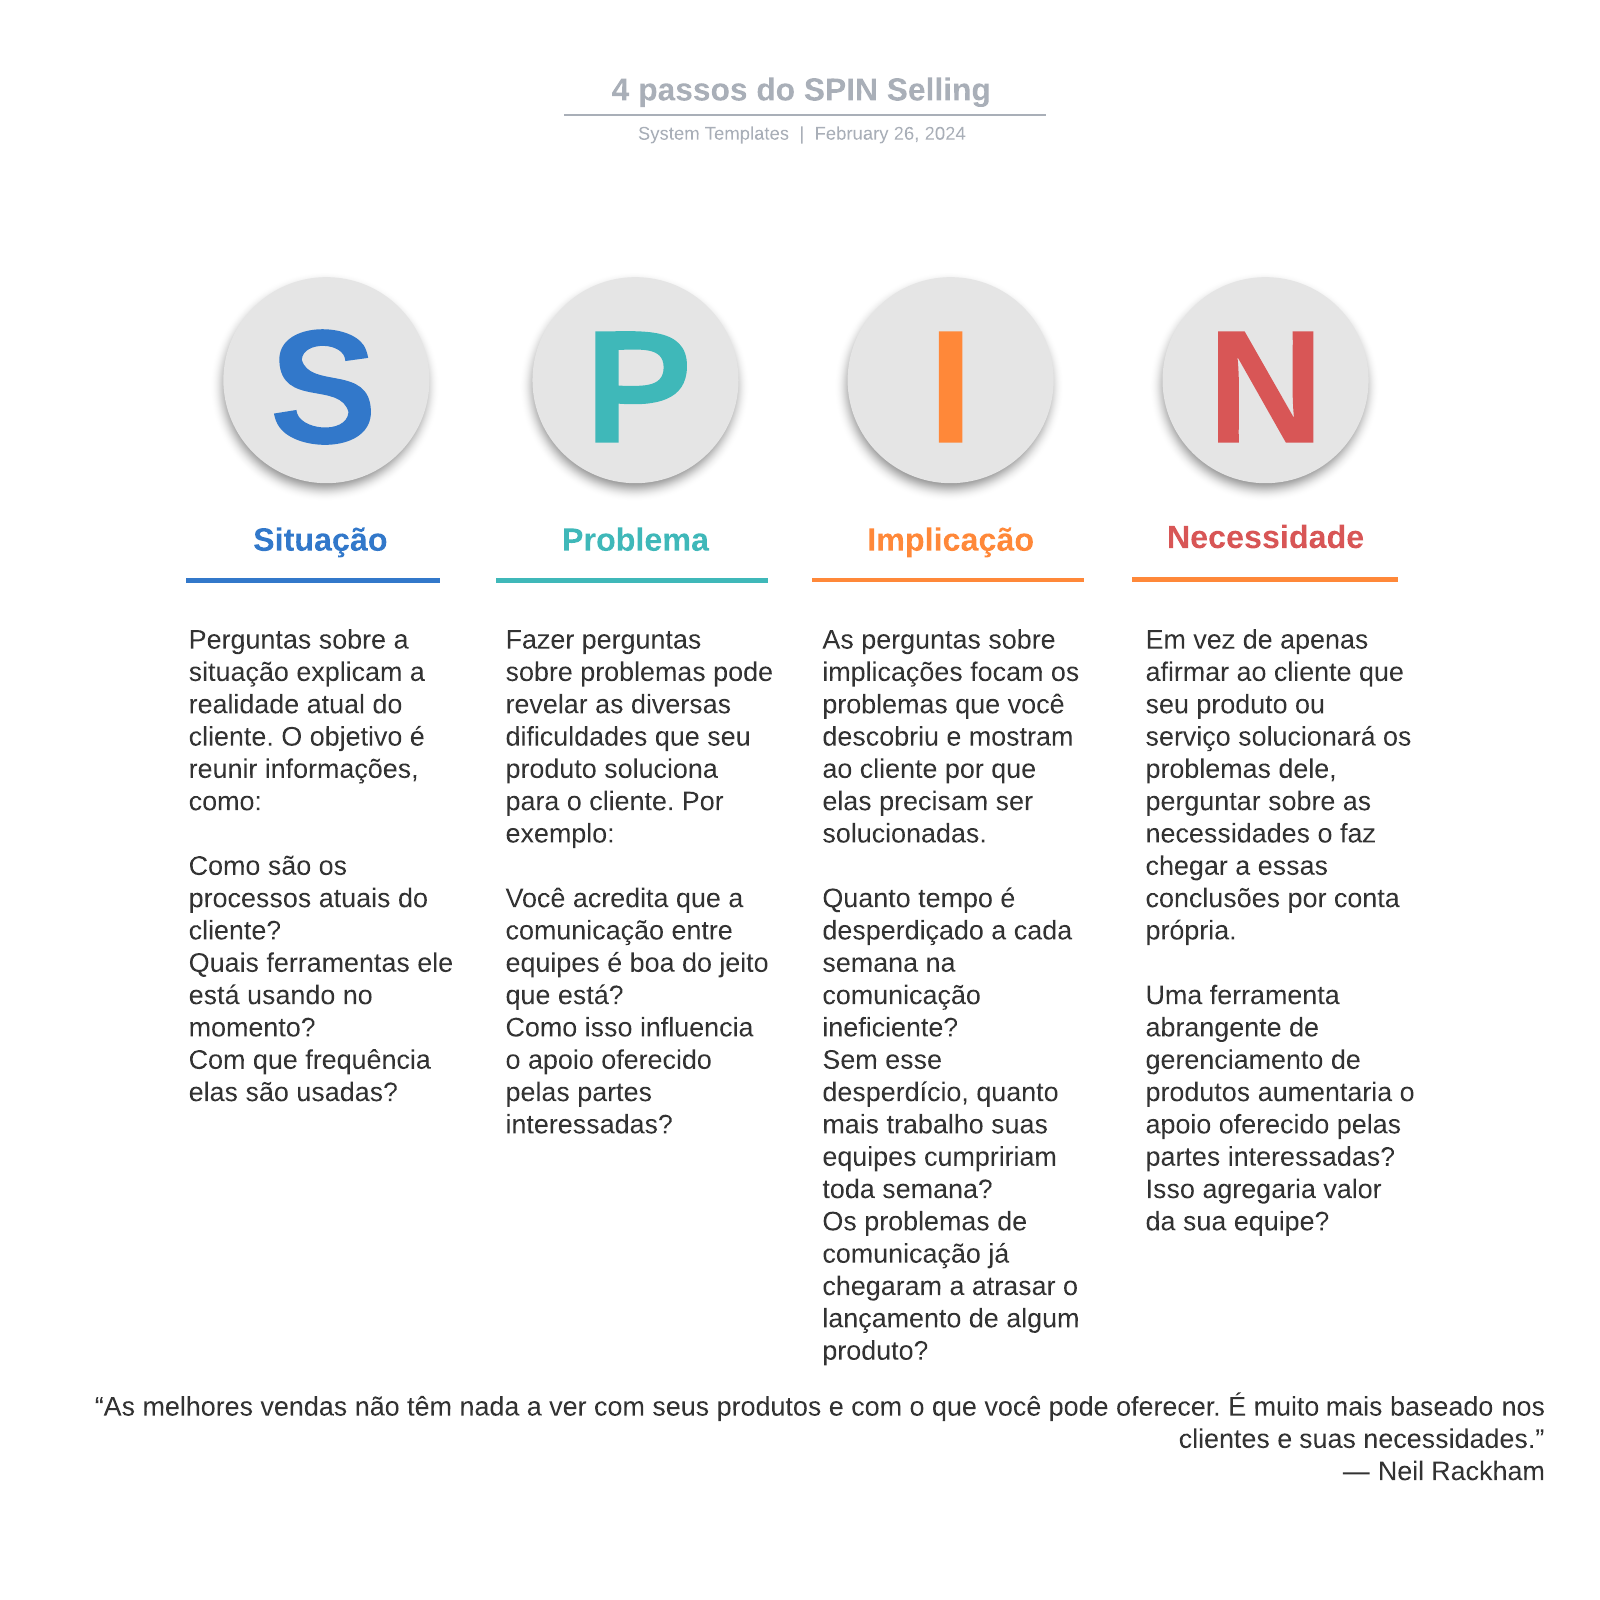 4 passos do SPIN Selling example